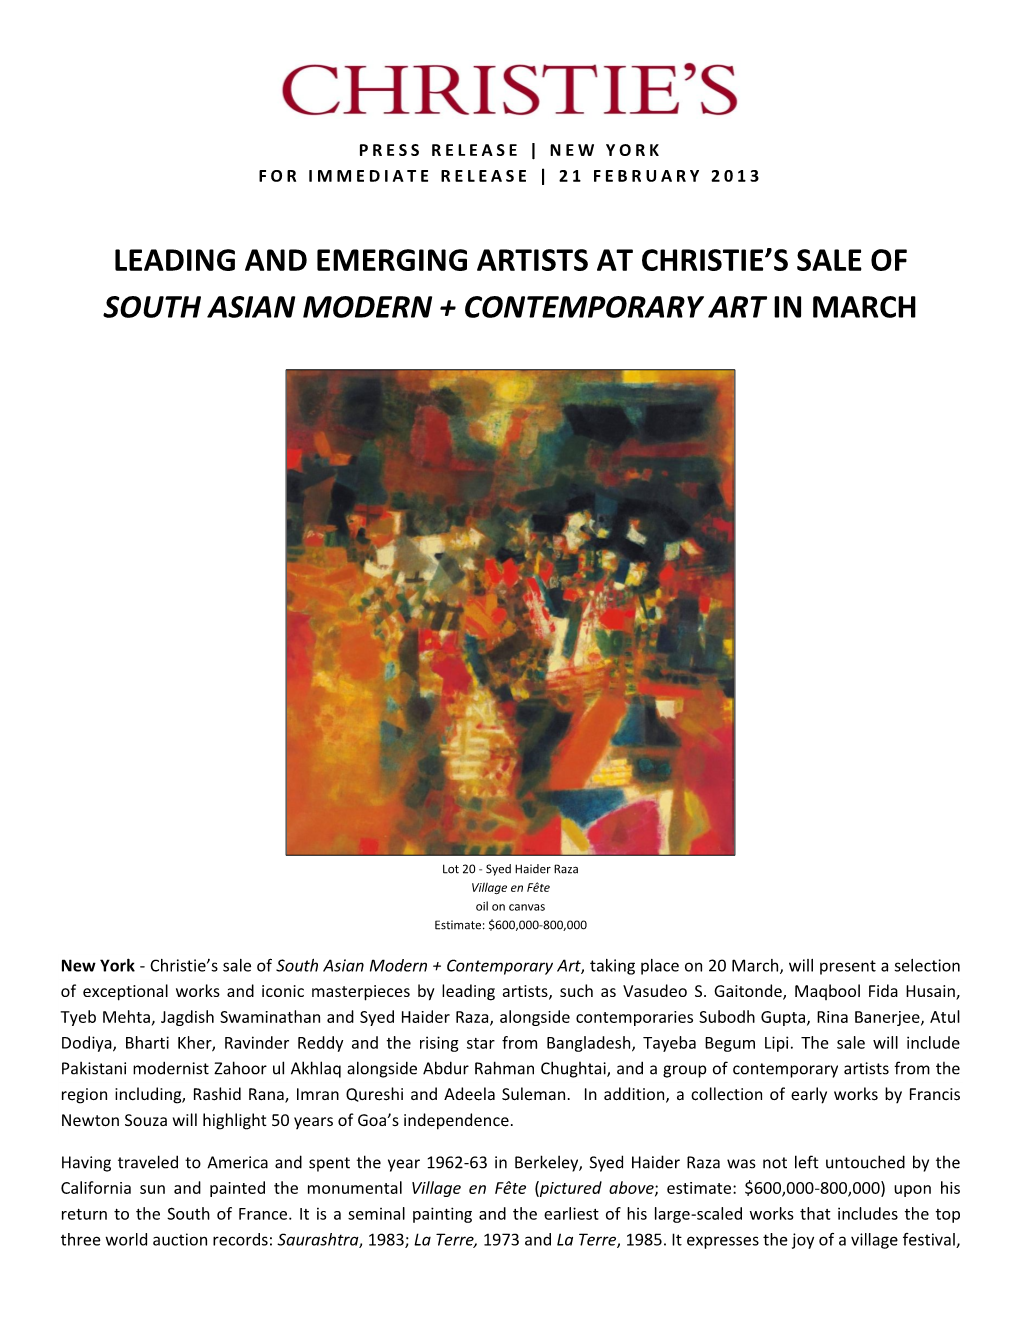 Leading and Emerging Artists at Christie's Sale of South Asian